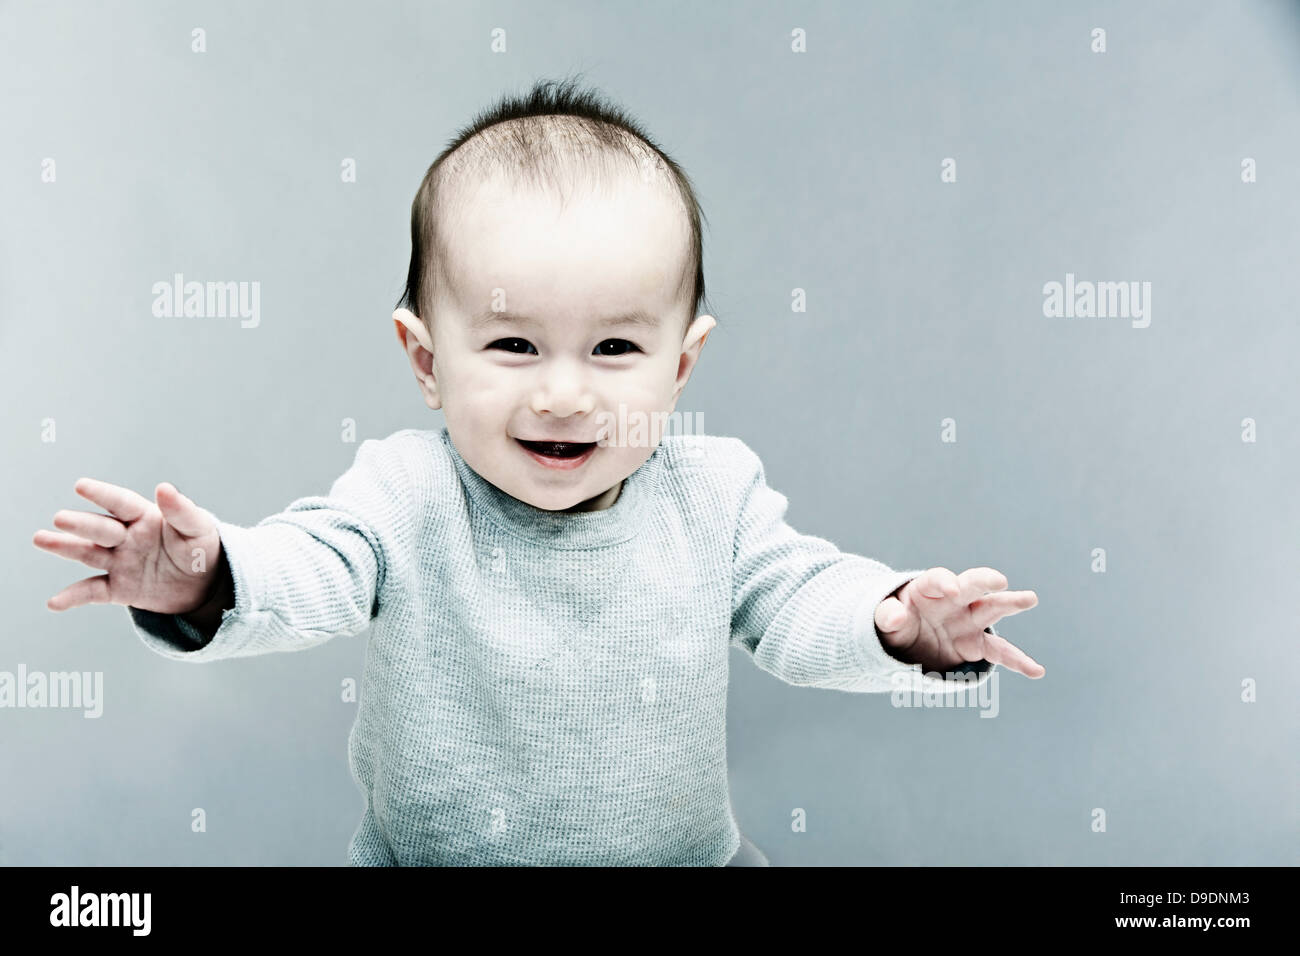 Portrait of baby boy wearing grey top Banque D'Images